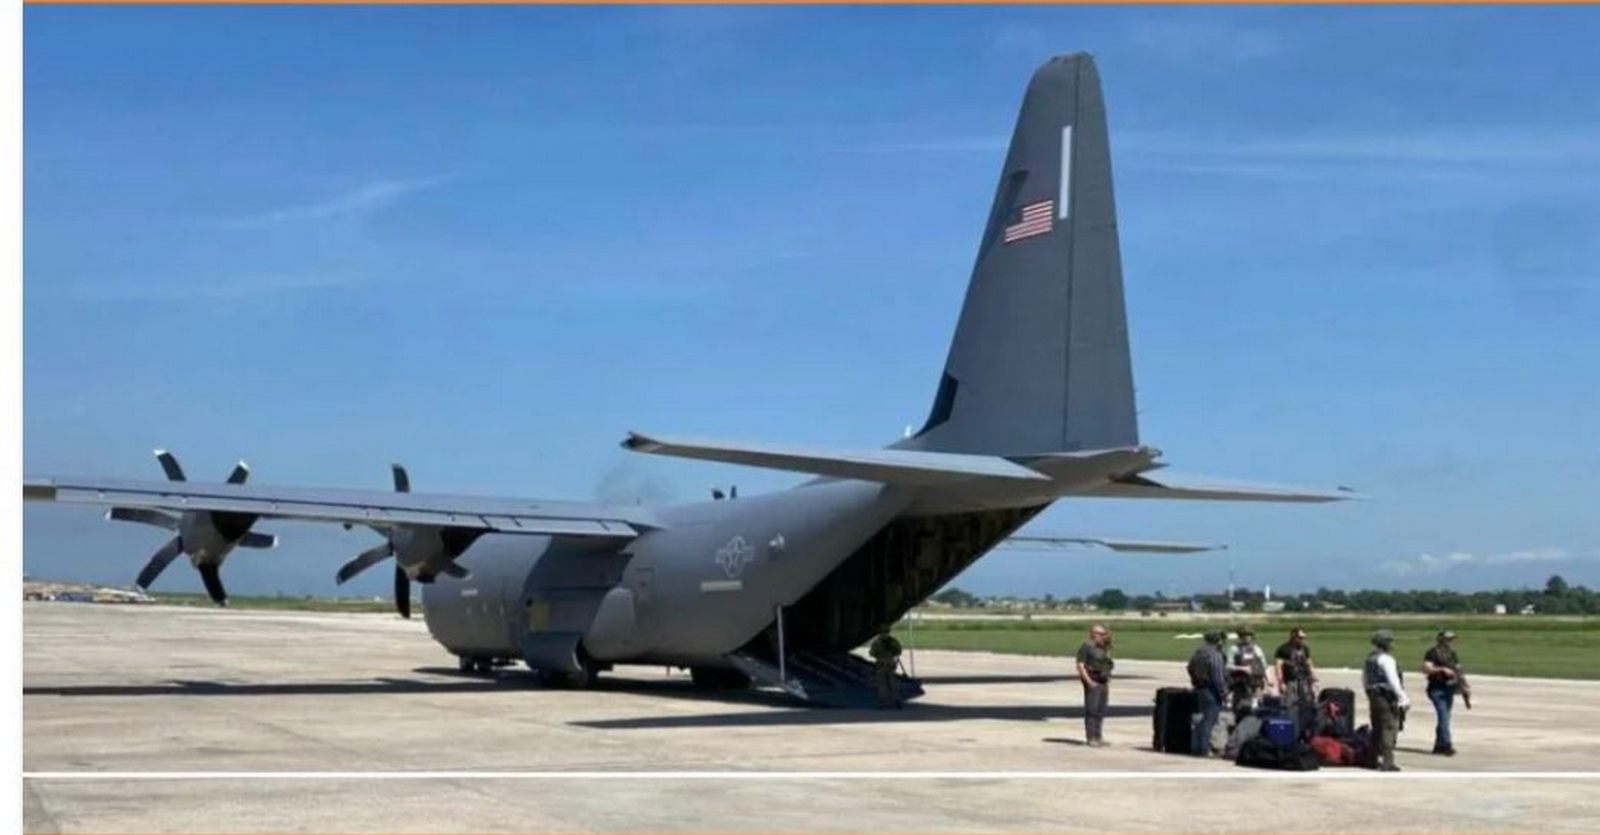 US Military Transport Plane Arrives for Multinational Security Mission in Haiti